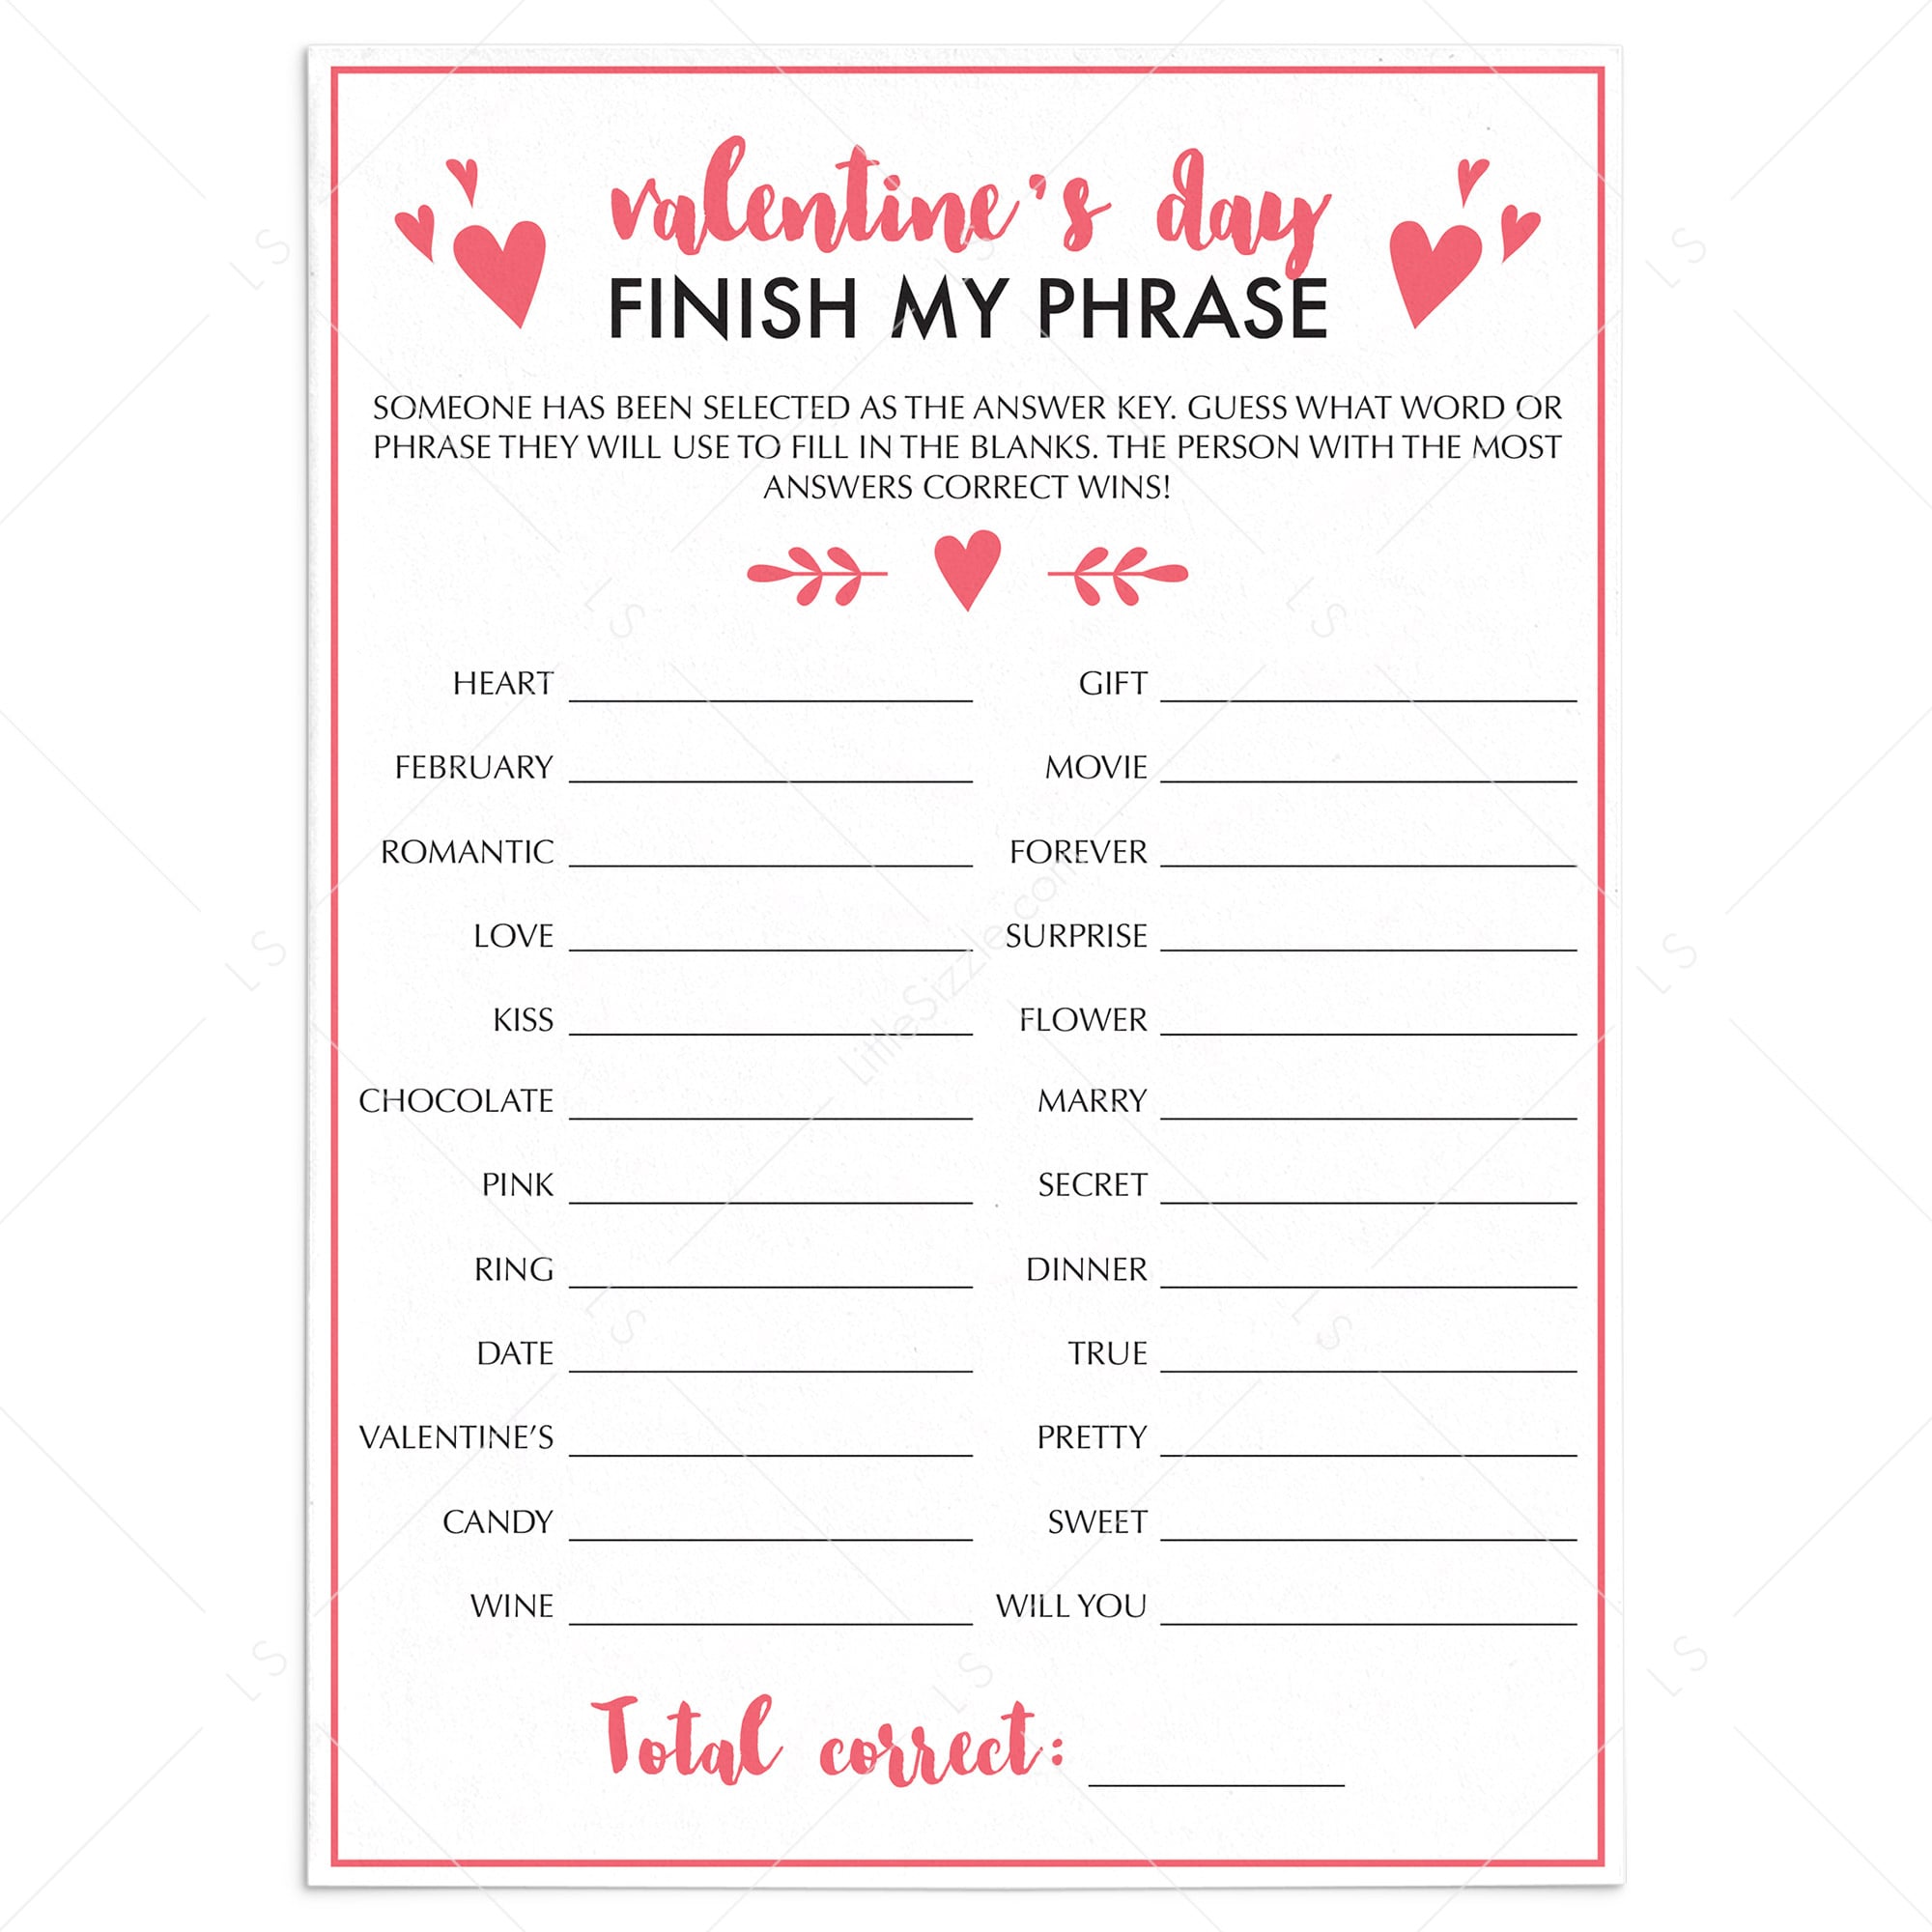 Valentine's Day Party Game Finish My Phrase by LittleSizzle